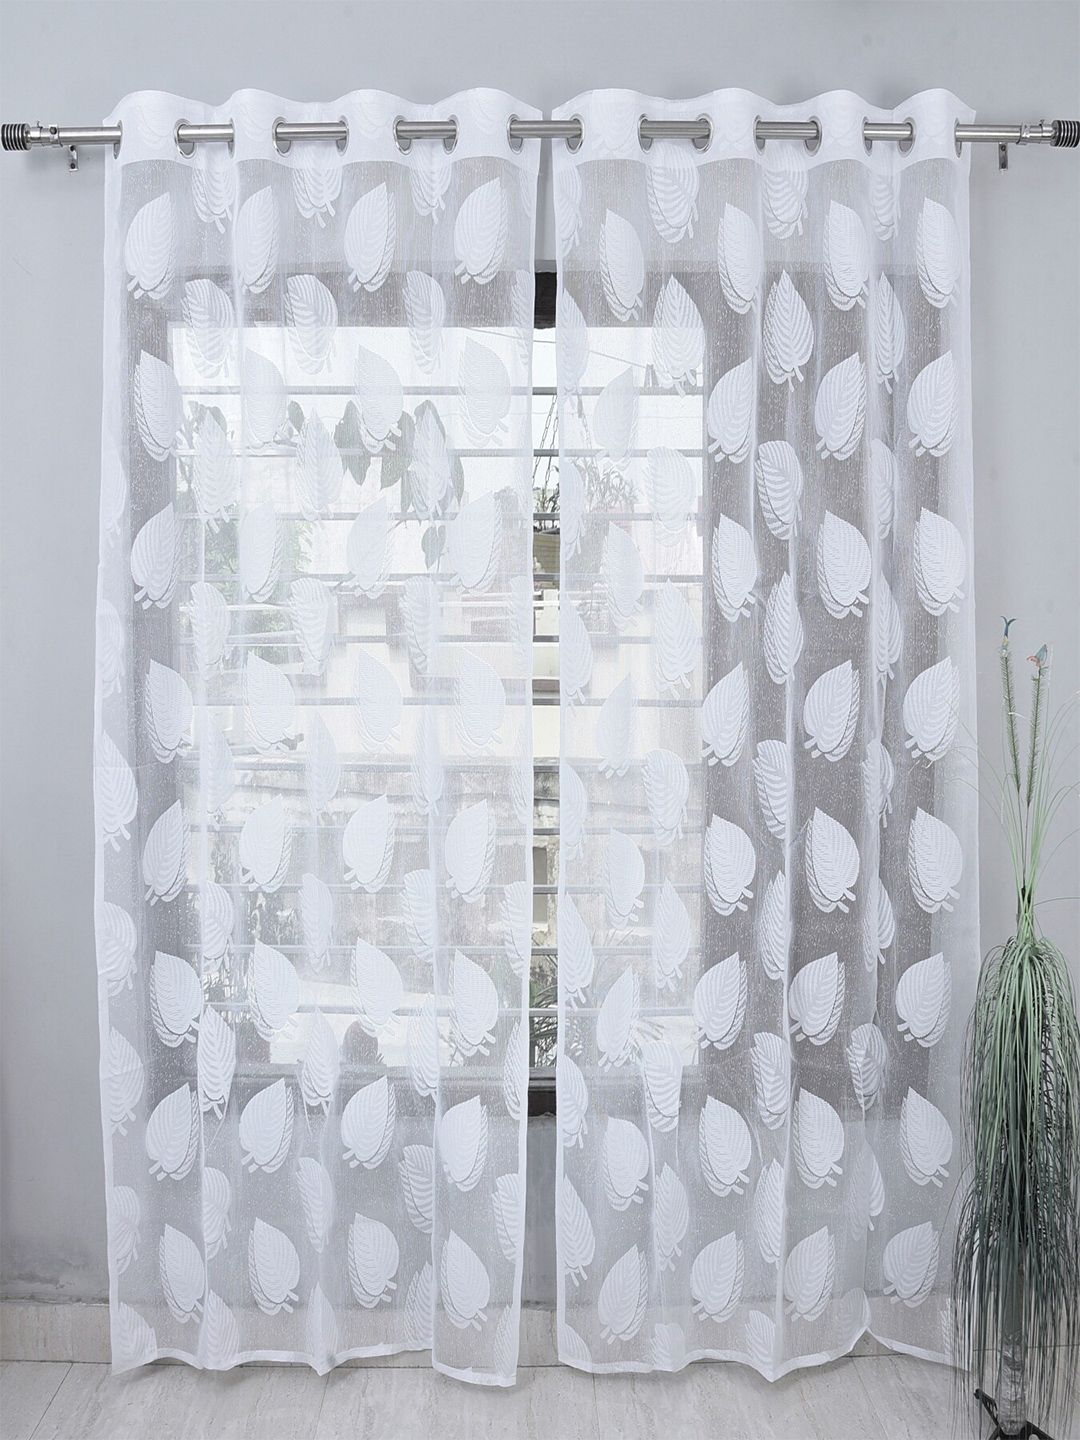 Homefab India Set of 2 White Sheer Window Curtain Price in India